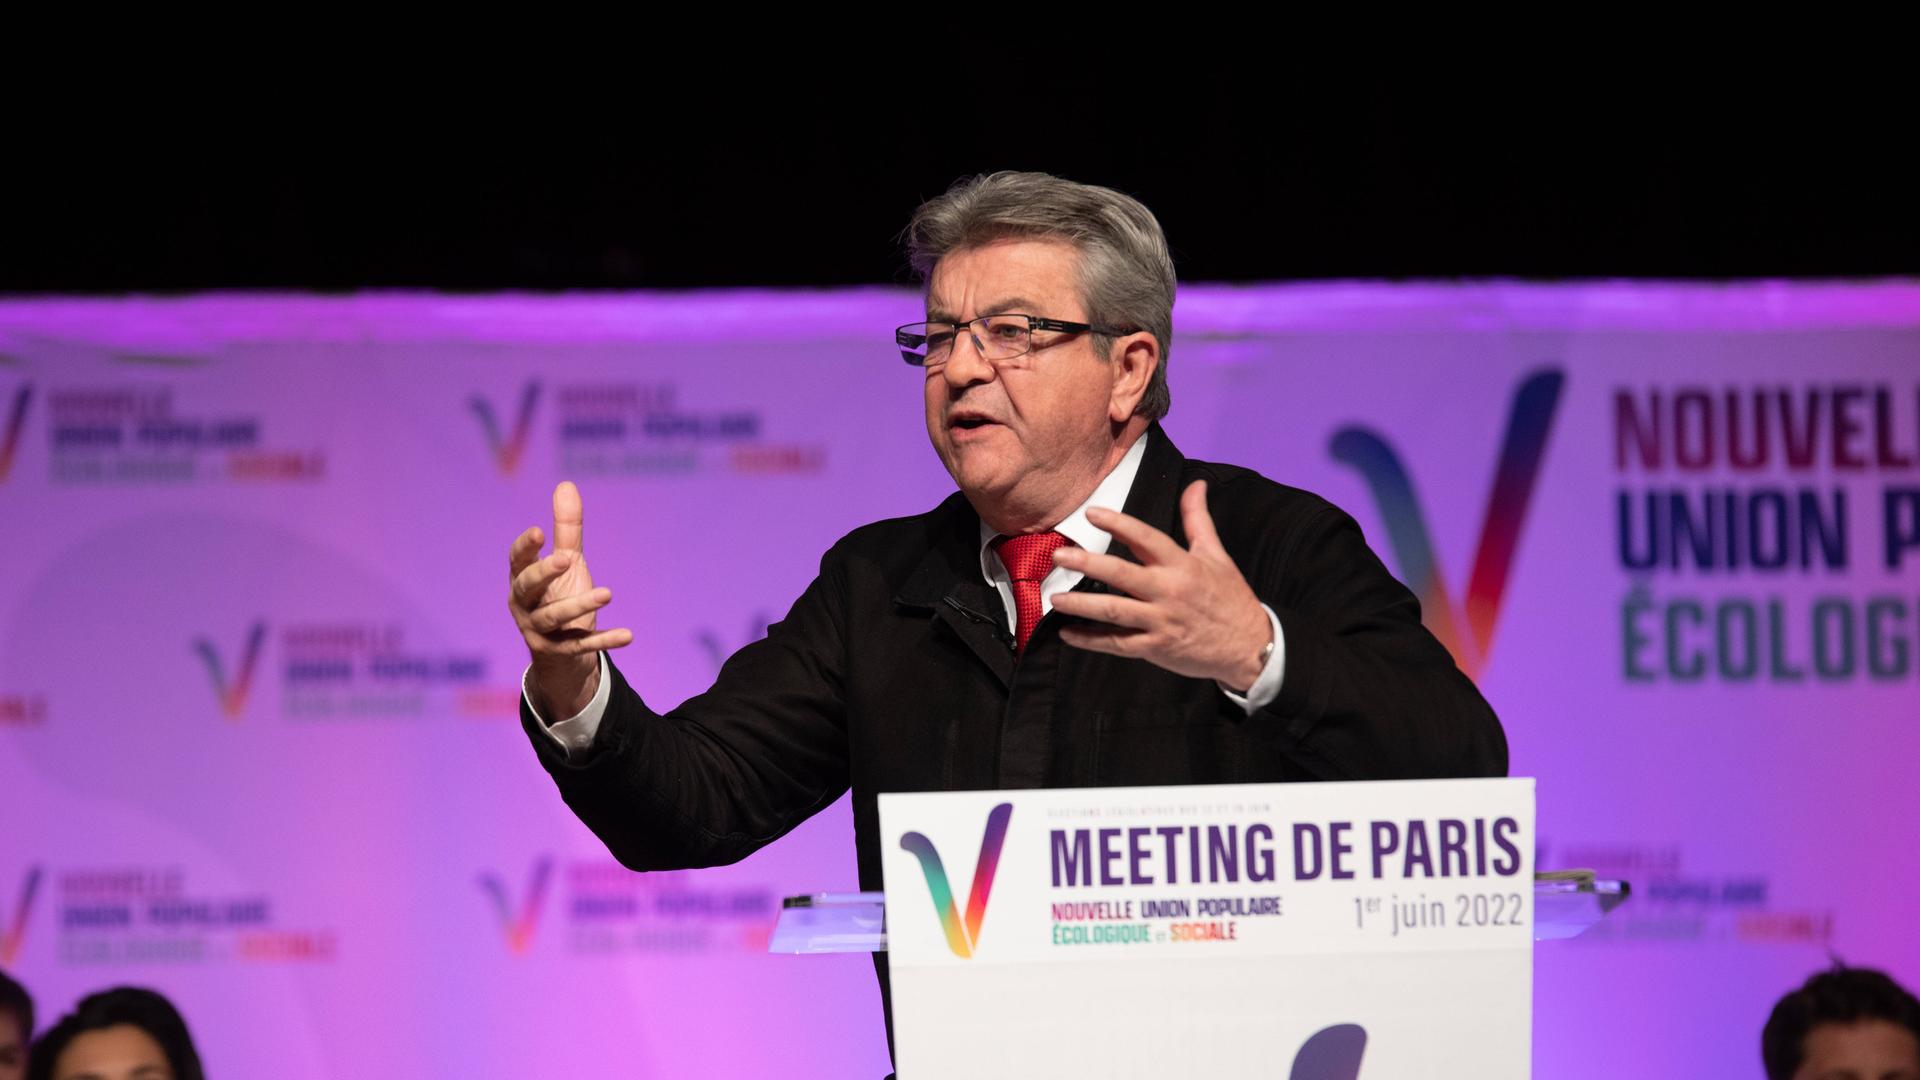 Meeting Of French Left-wing Electoral Coalition Nupes In Paris Jean Luc Melenchon gives a speech at the meeting of Frenc